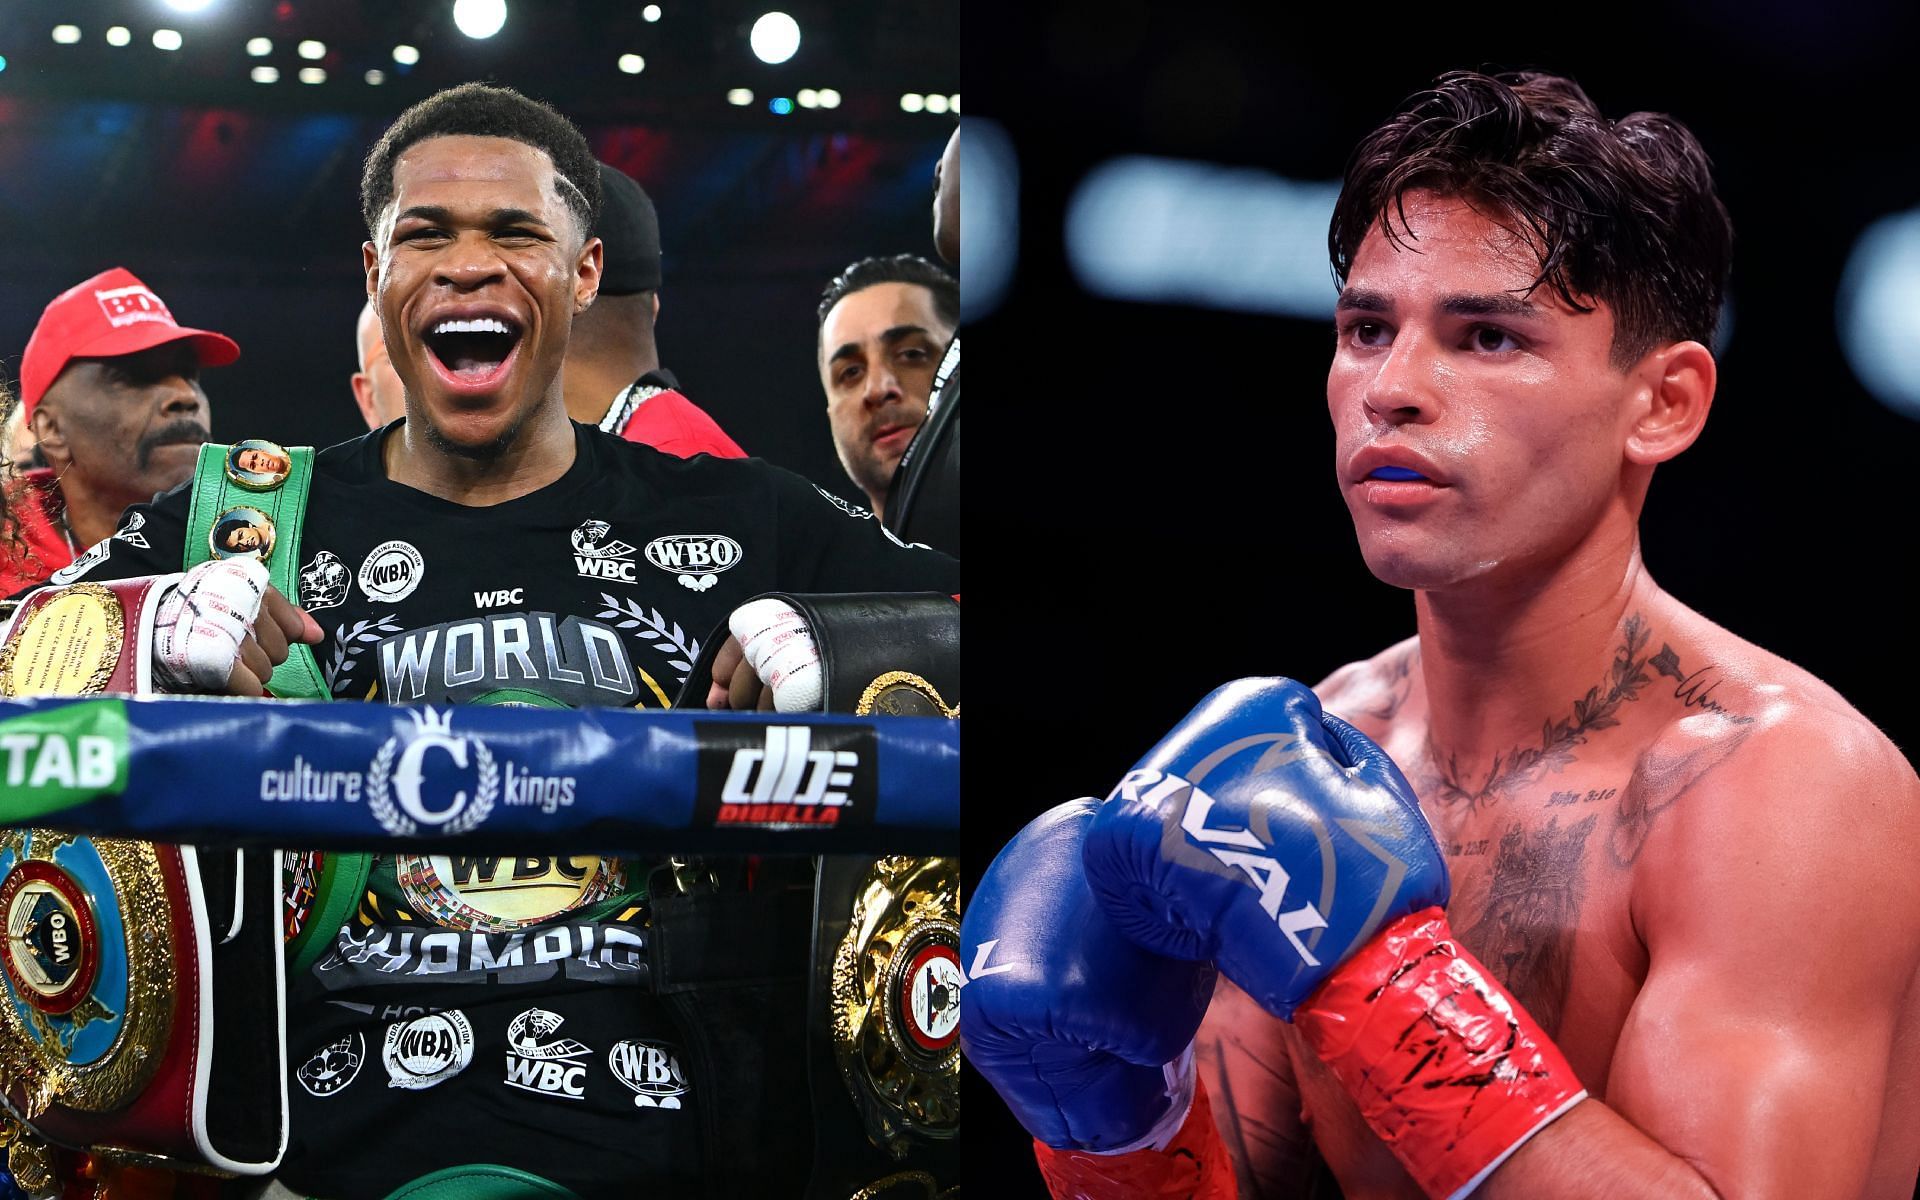 Ryan Garcia (right) hurls accusations at Devin Haney (left) [Image via: Getty Images] 